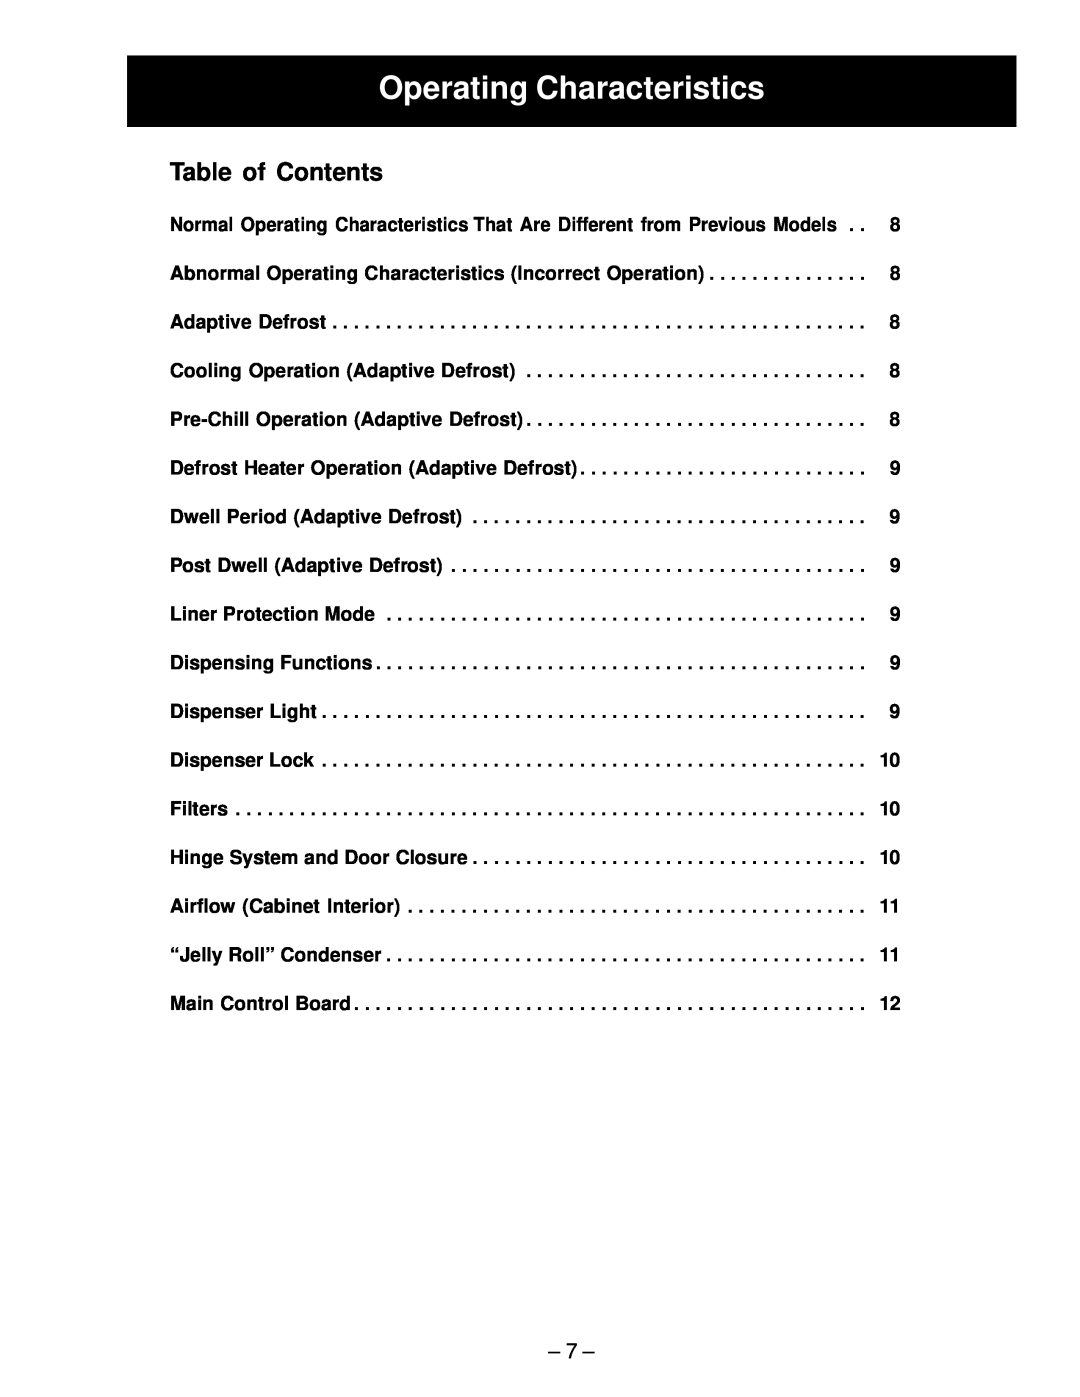 GE GSS20, GSS22, GSS25, ESS25, ESS22, HSS25, HSS22, SSS25 manual Operating Characteristics, Table of Contents 